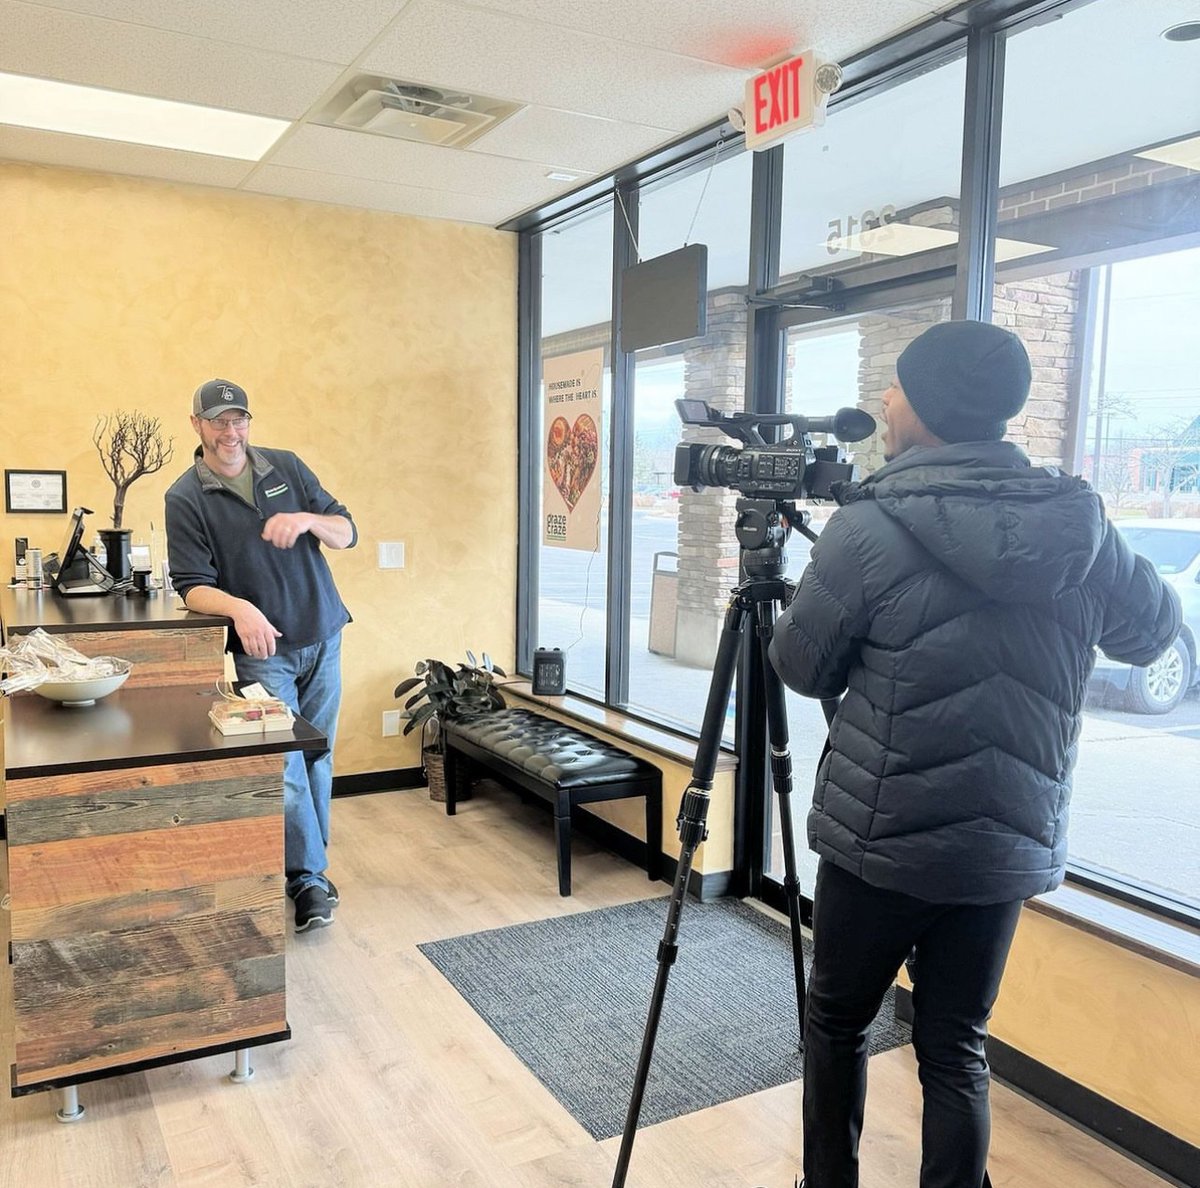 Lindsey and Silas Coffelt, the proud owners of Graze Craze in Okemos, Michigan, recently had the exciting opportunity to join a segment on WILX Channel 10 News. They were featured for their expertise in preparing charcuterie orders perfect for the big game! This was a fantasti...